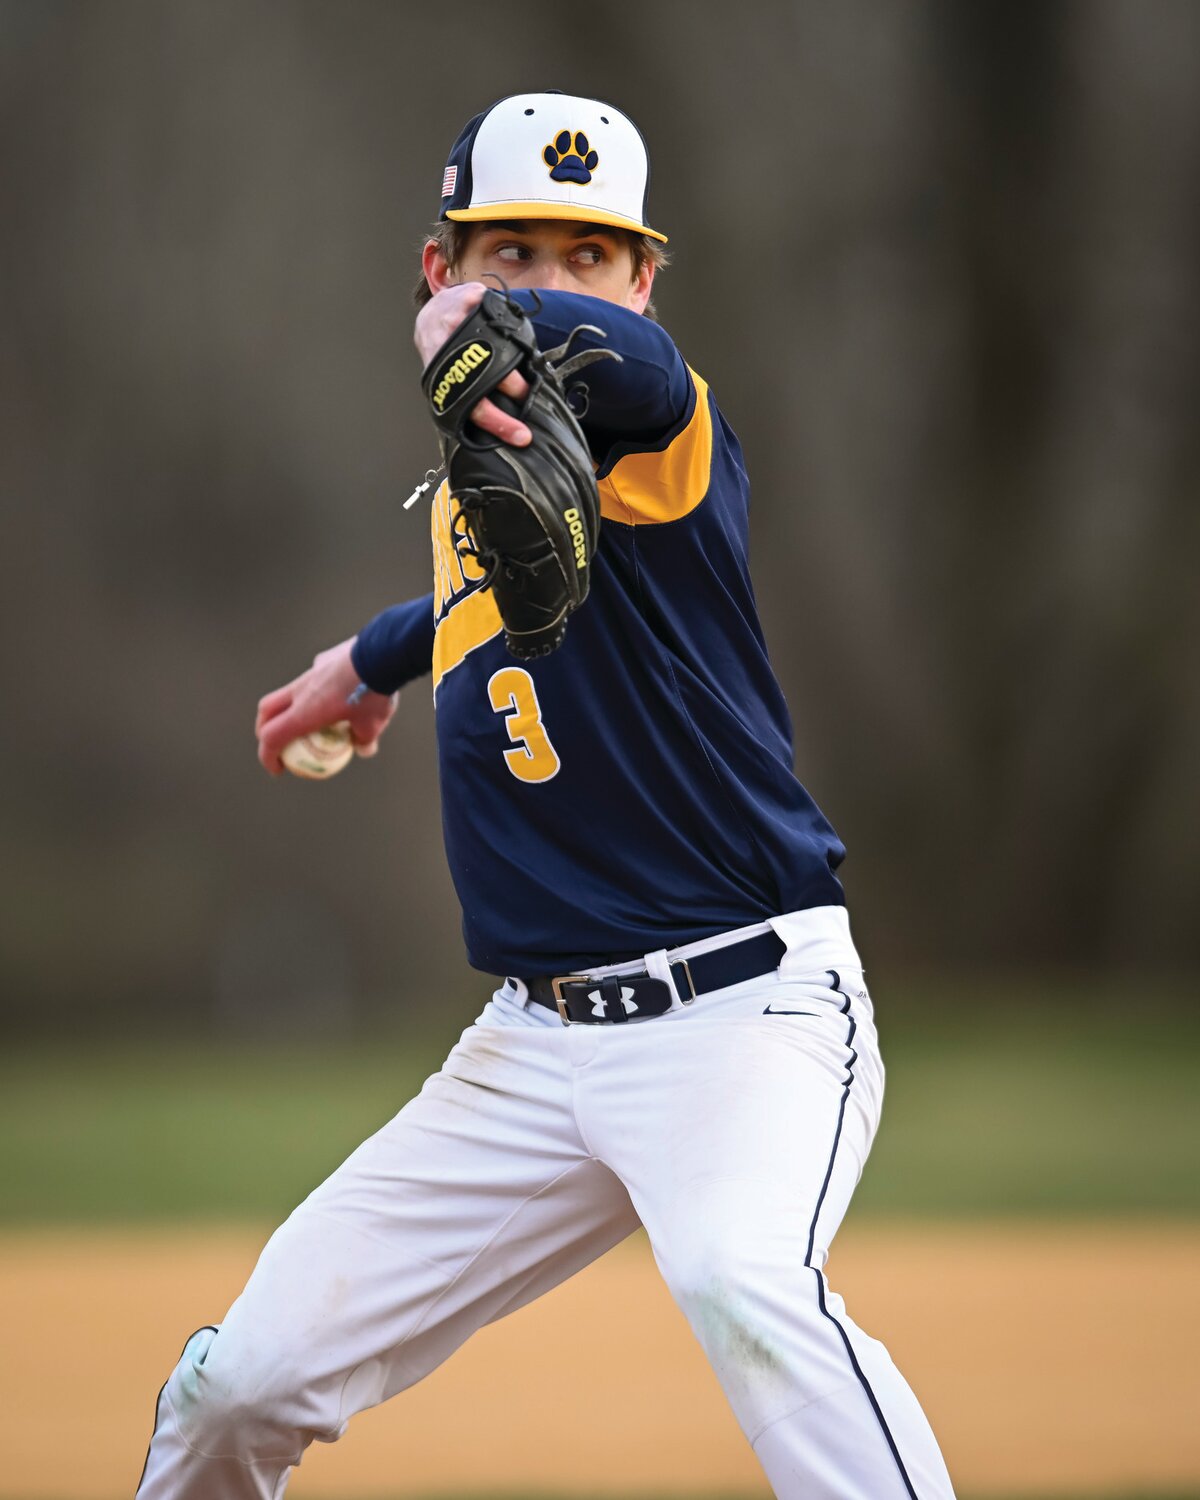 New Hope-Solebury pitcher Tyler Corino delivers a pitch in the second inning.